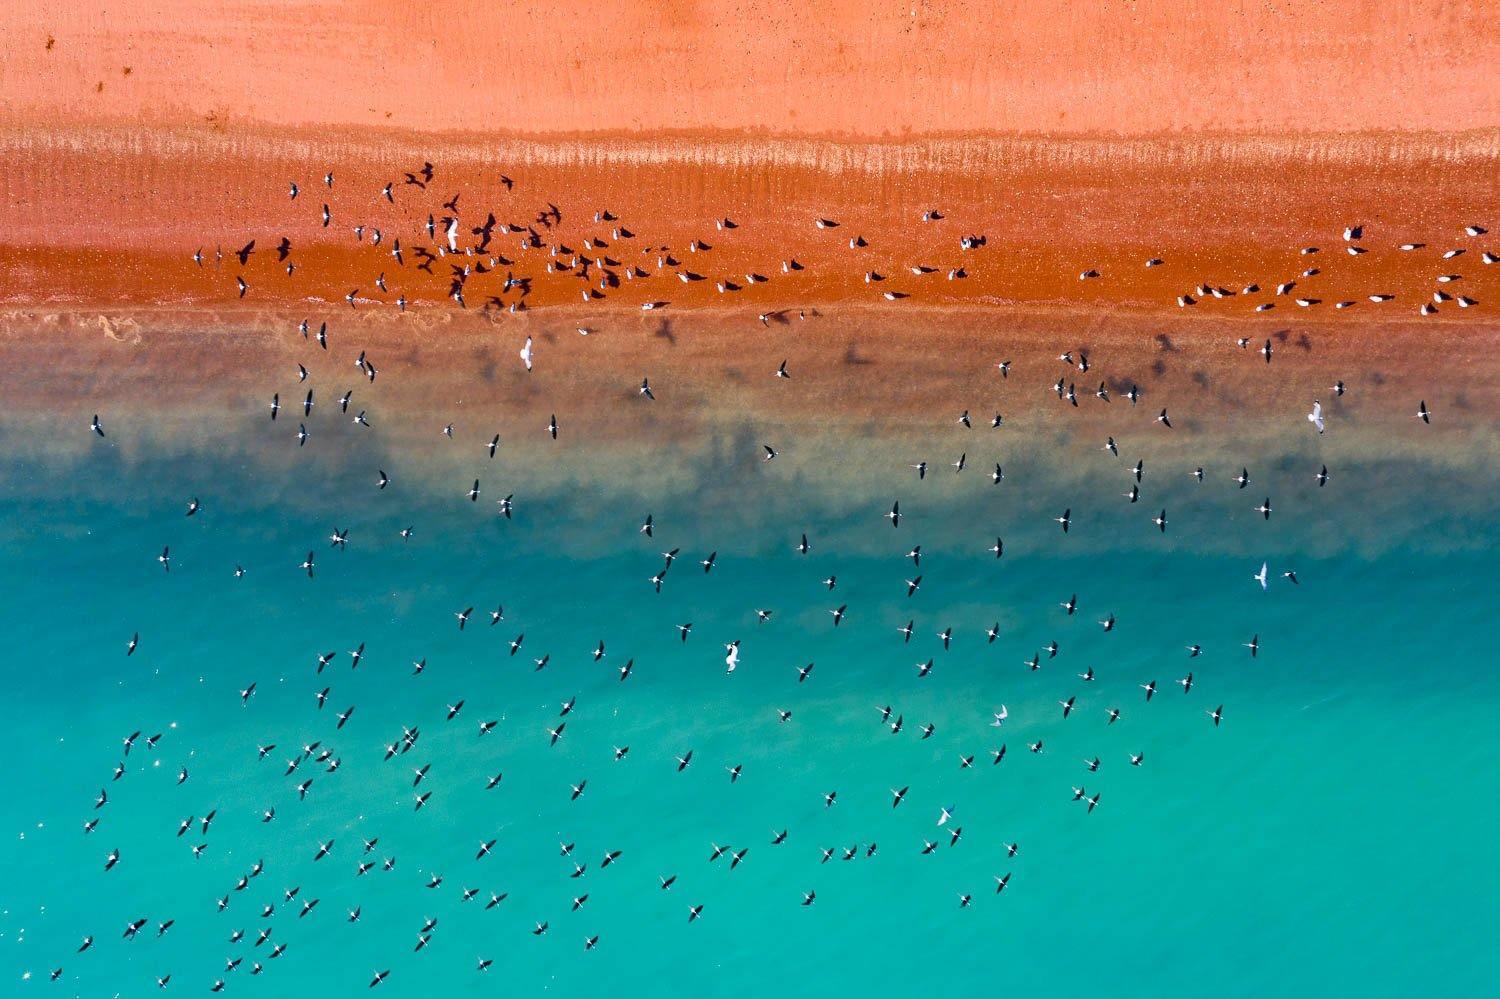 A mars like-land connecting with a clear blue surface with a blurred combination in between, a group of countless birds flying over the scene, Broome #25